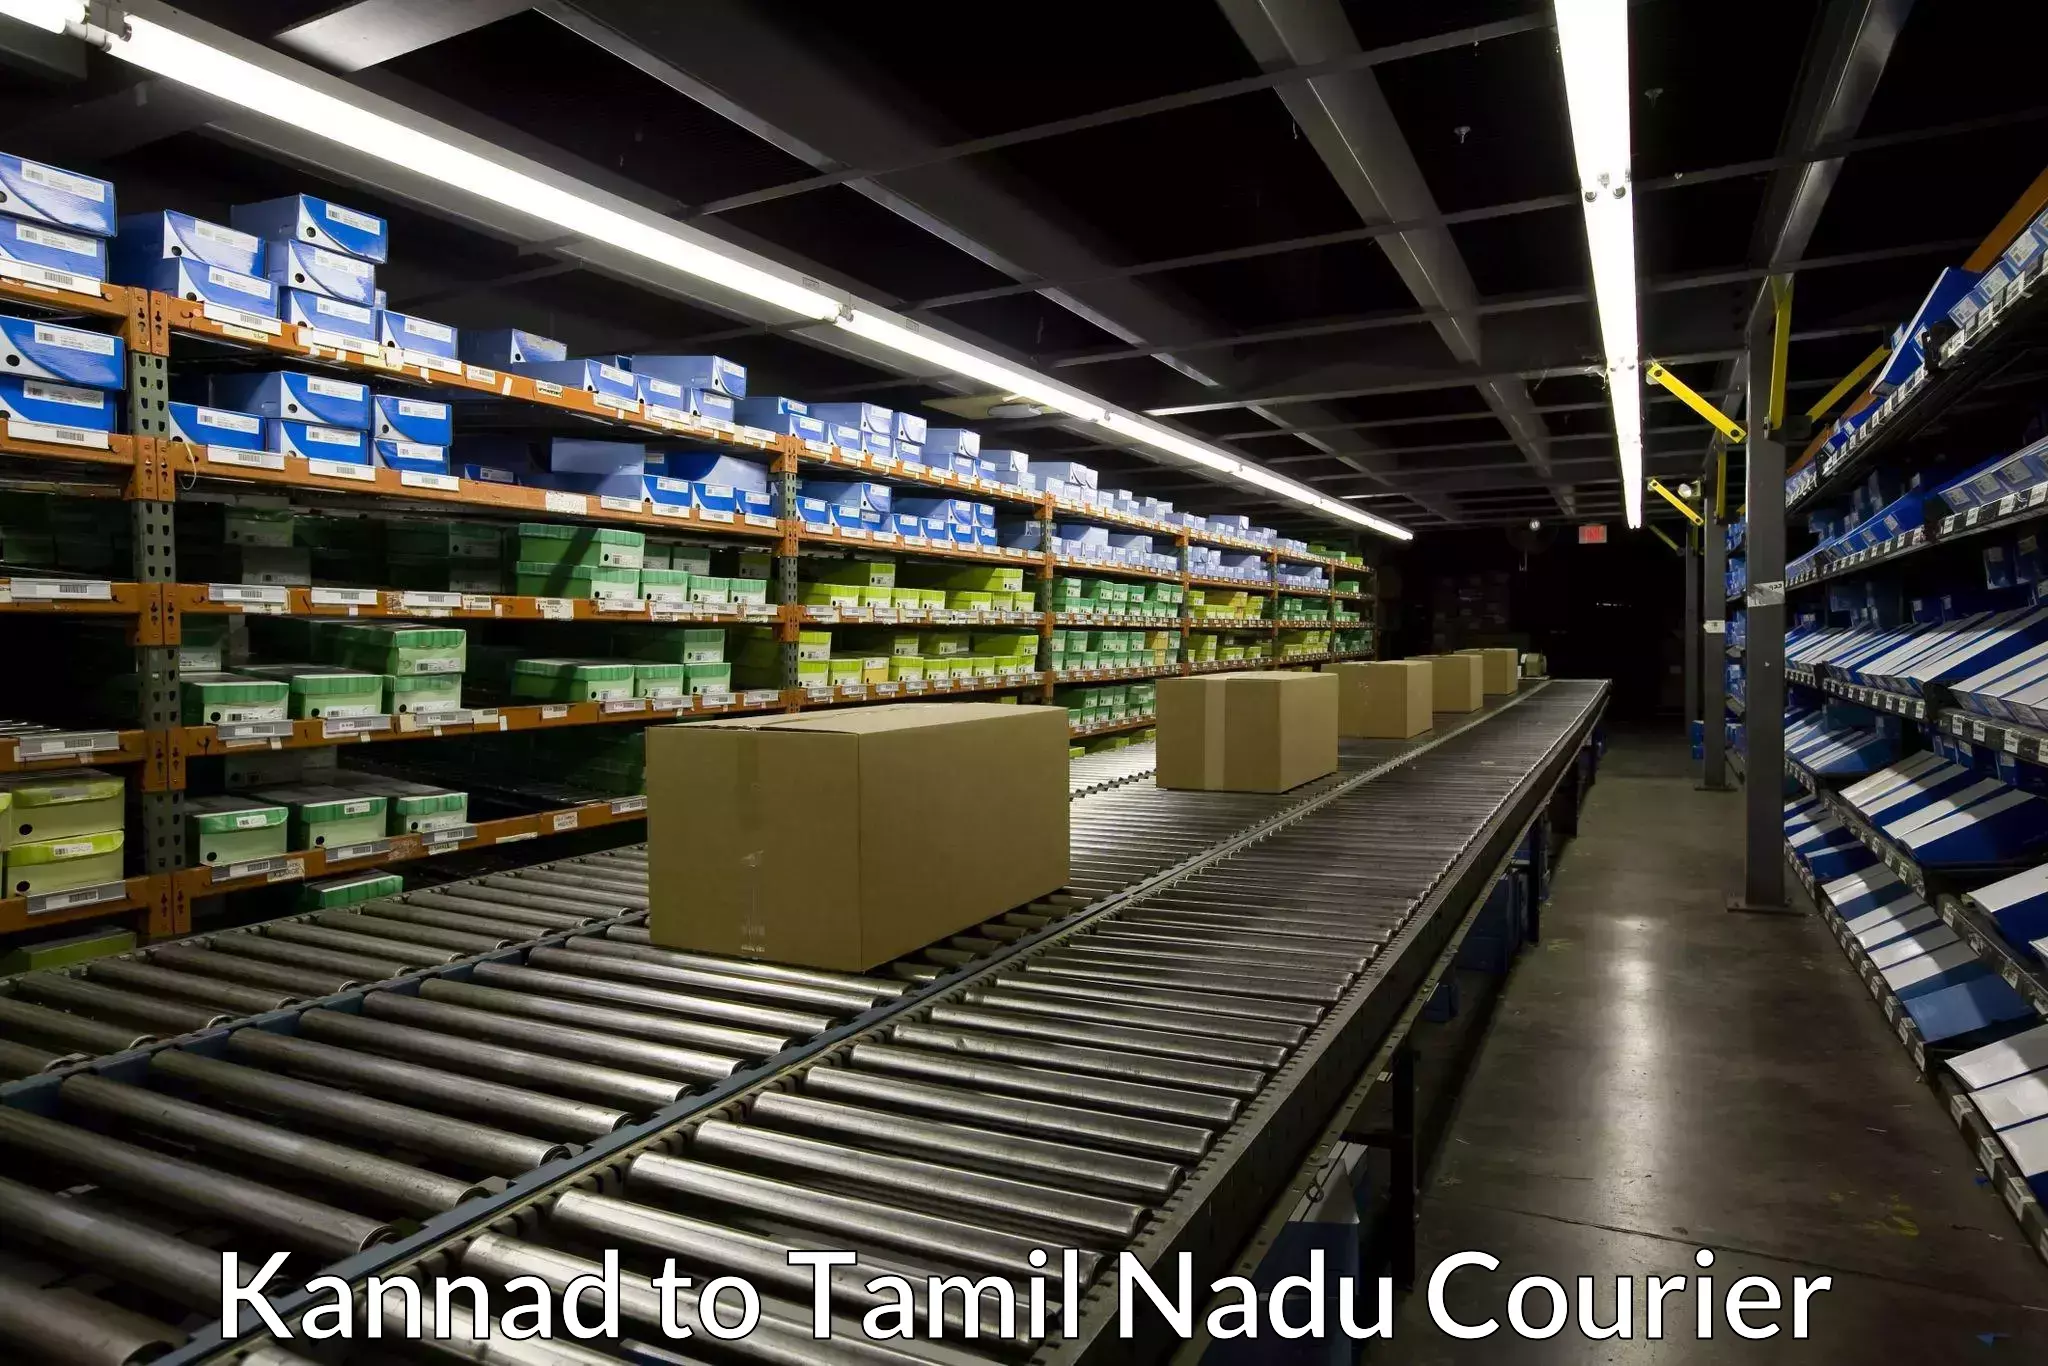 Pharmaceutical courier Kannad to Tamil Nadu